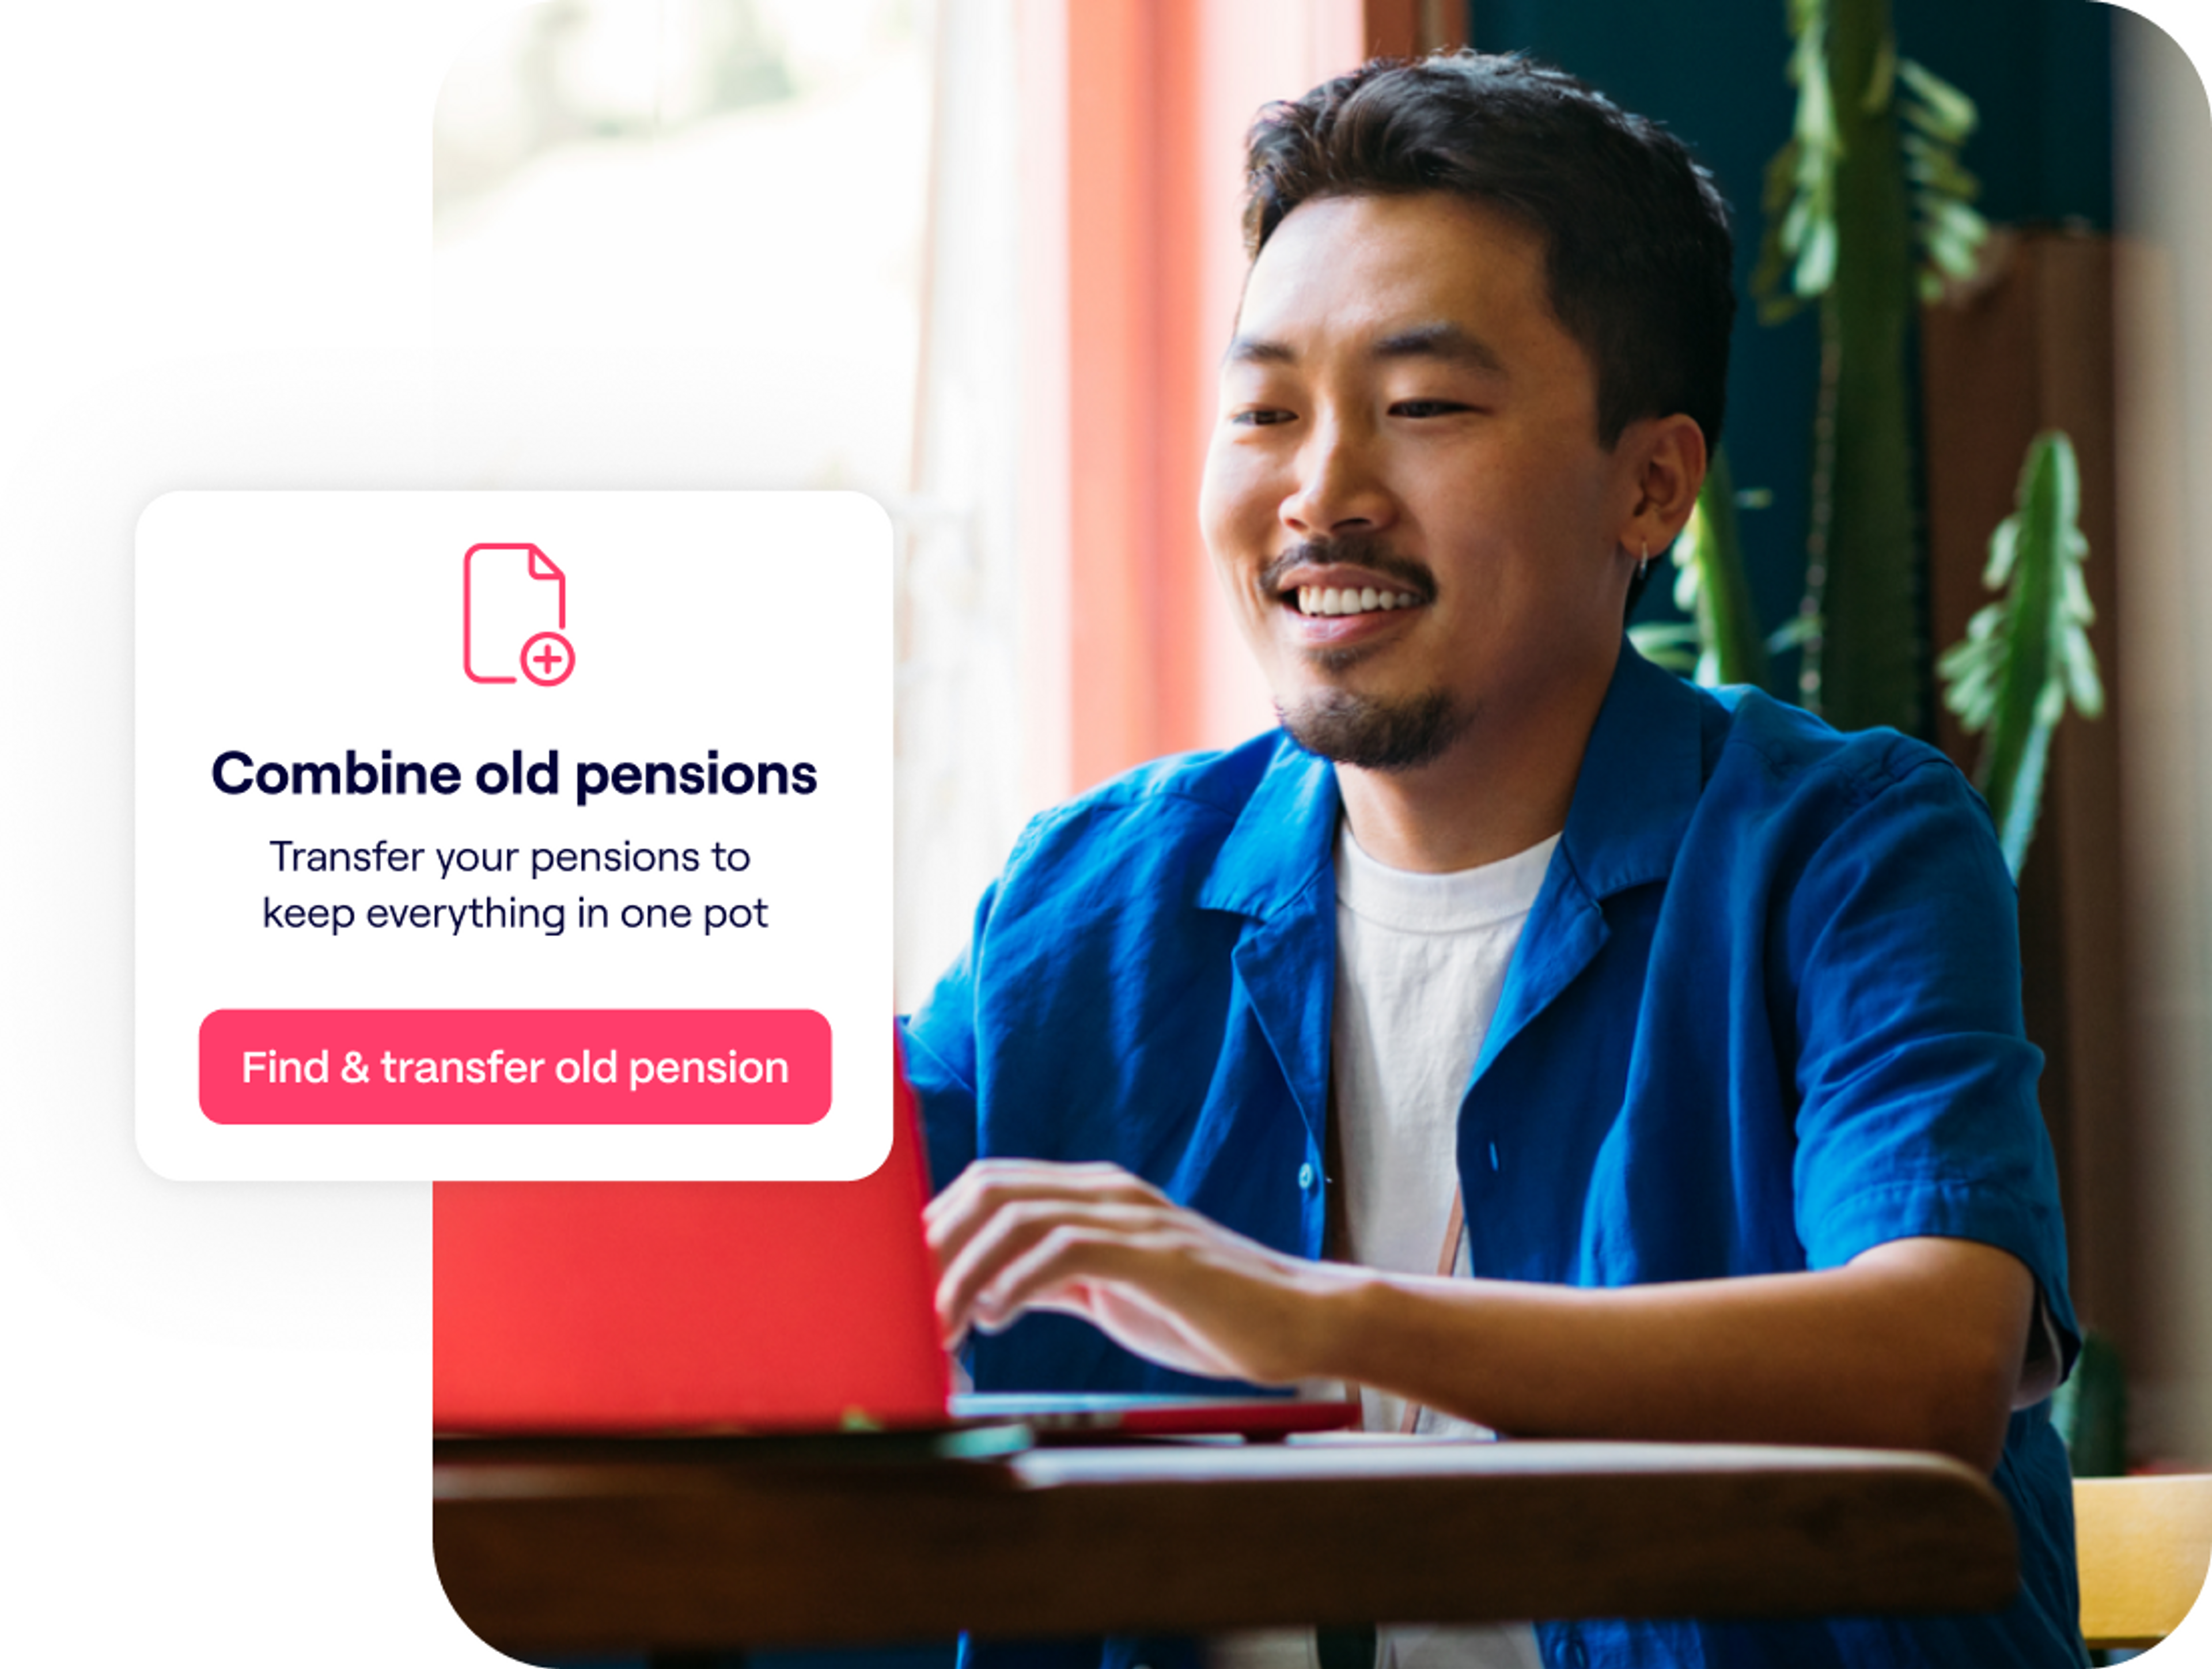 A photo of a man smiling while looking at a laptop and an excerpt of the Penfold pension app showing the combine old pensions screen